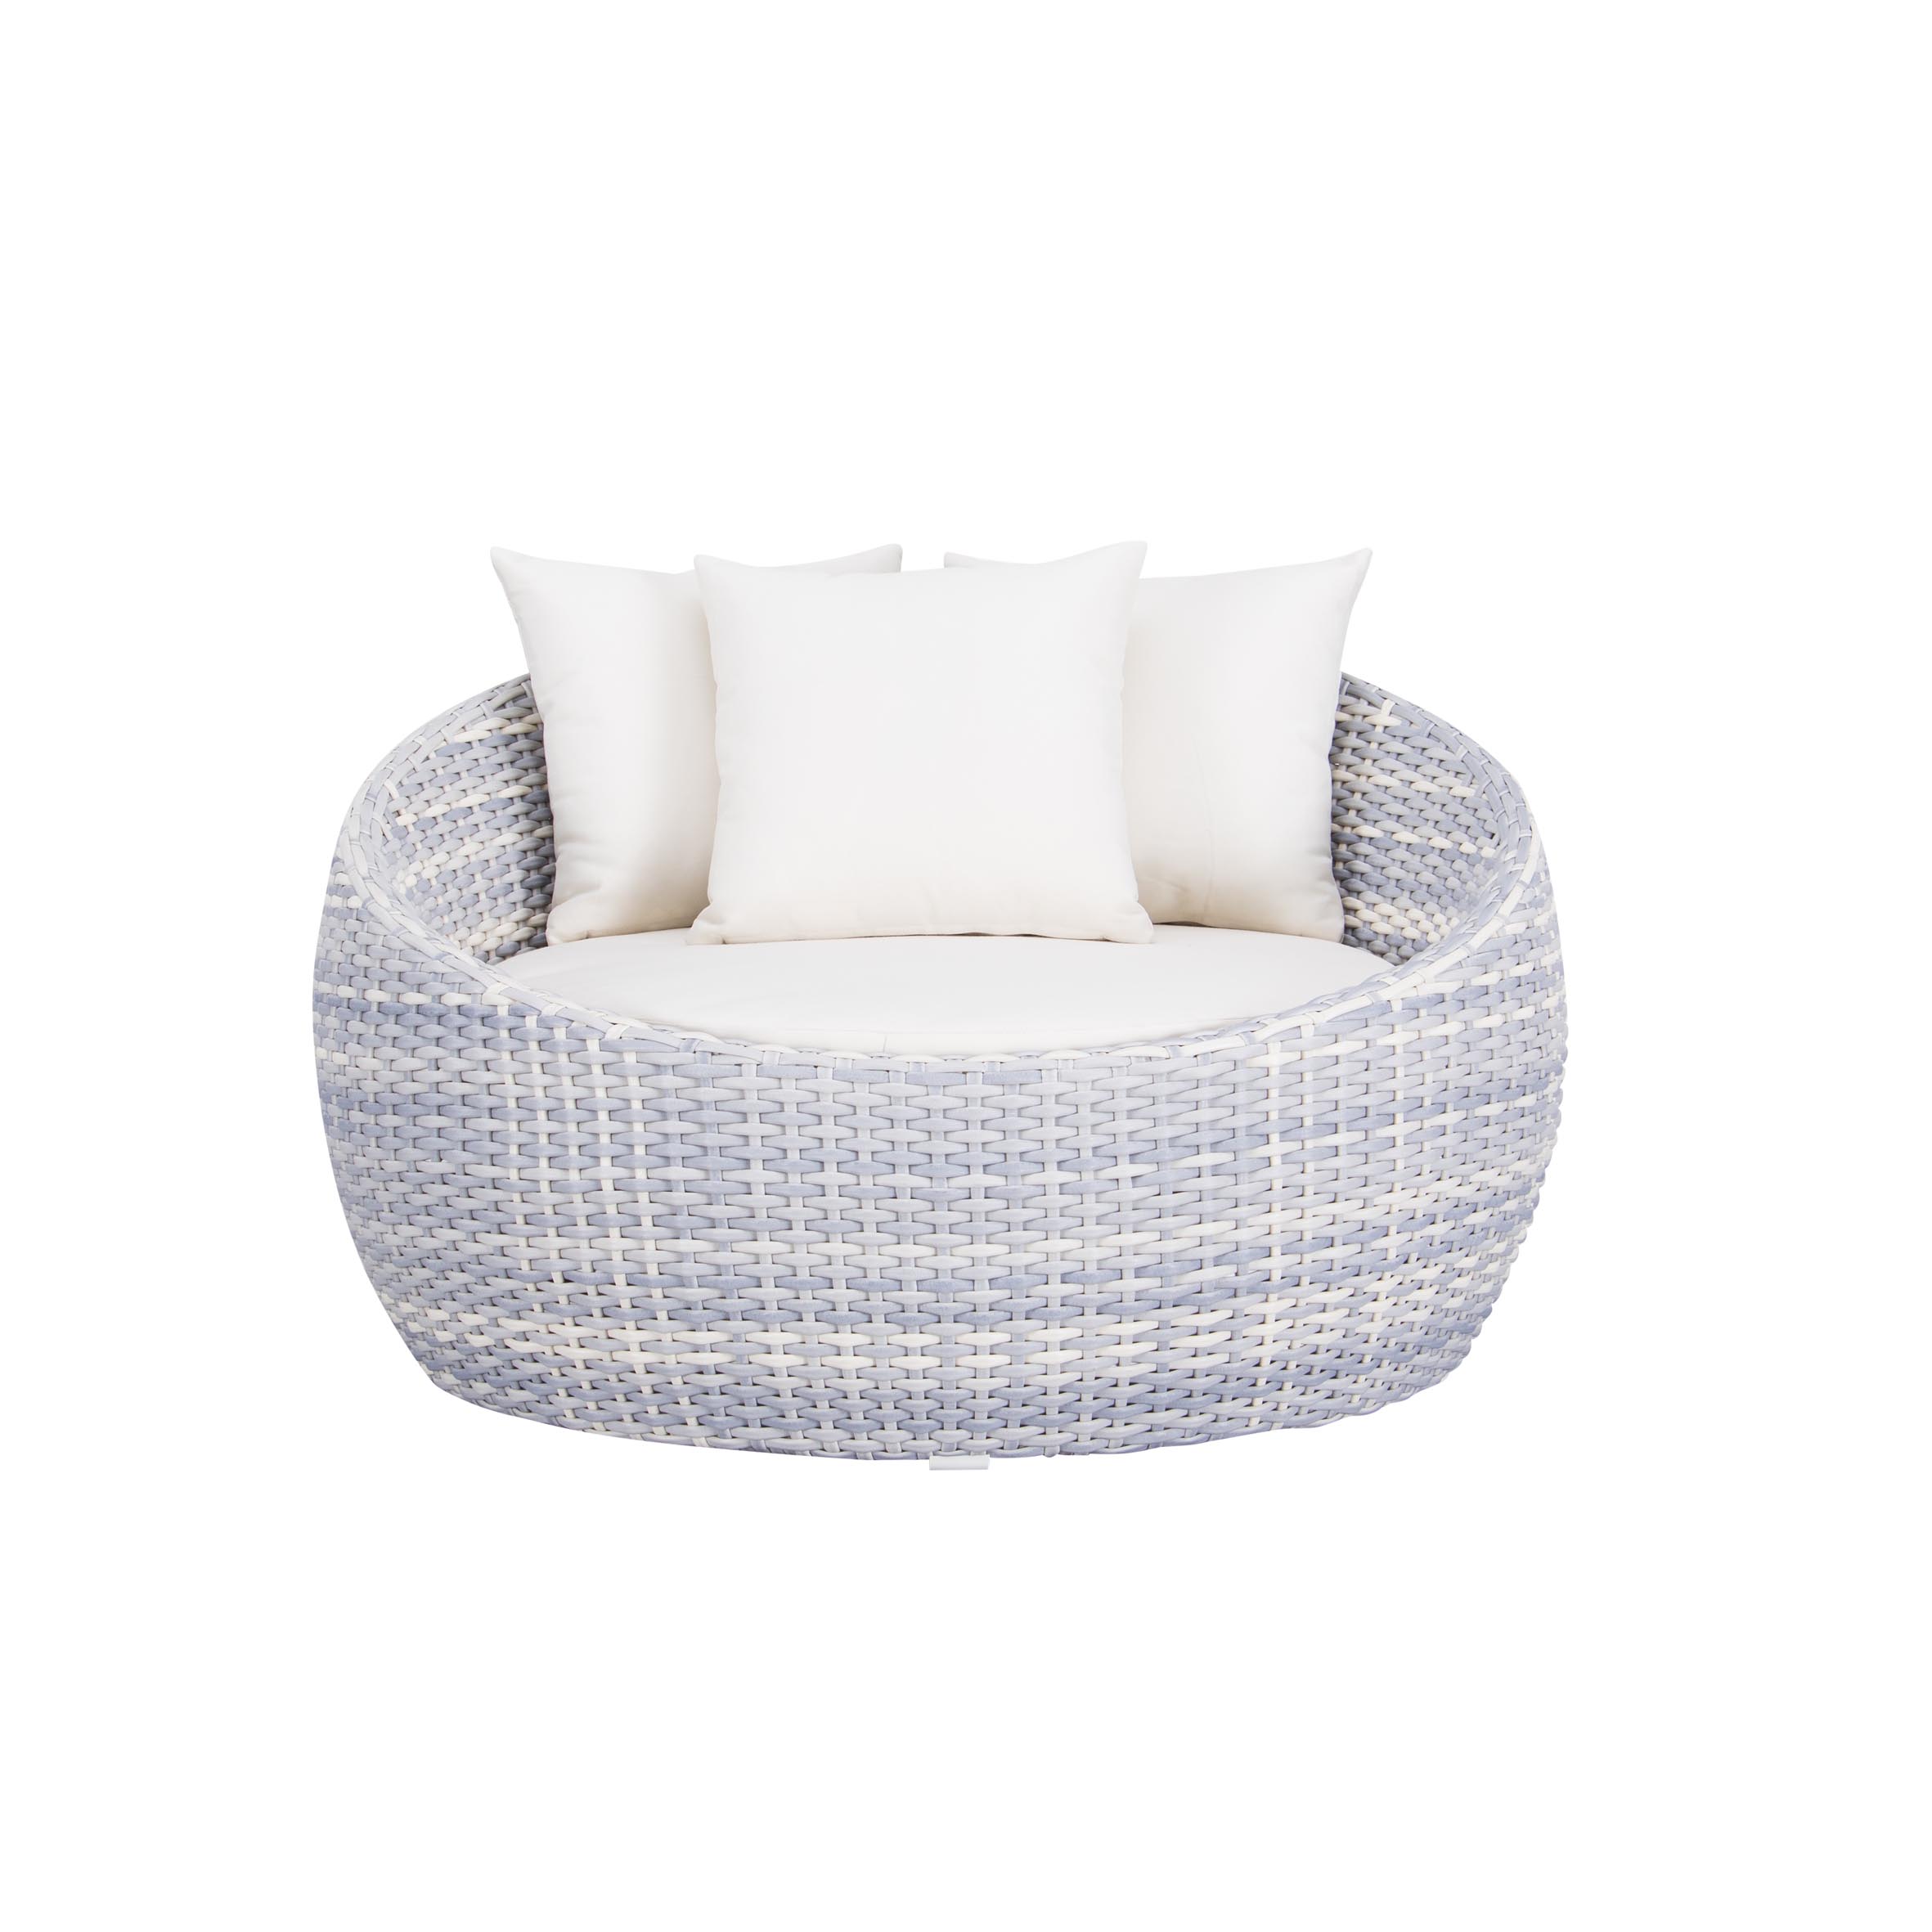 Caelum rattan per daybed Featured Image